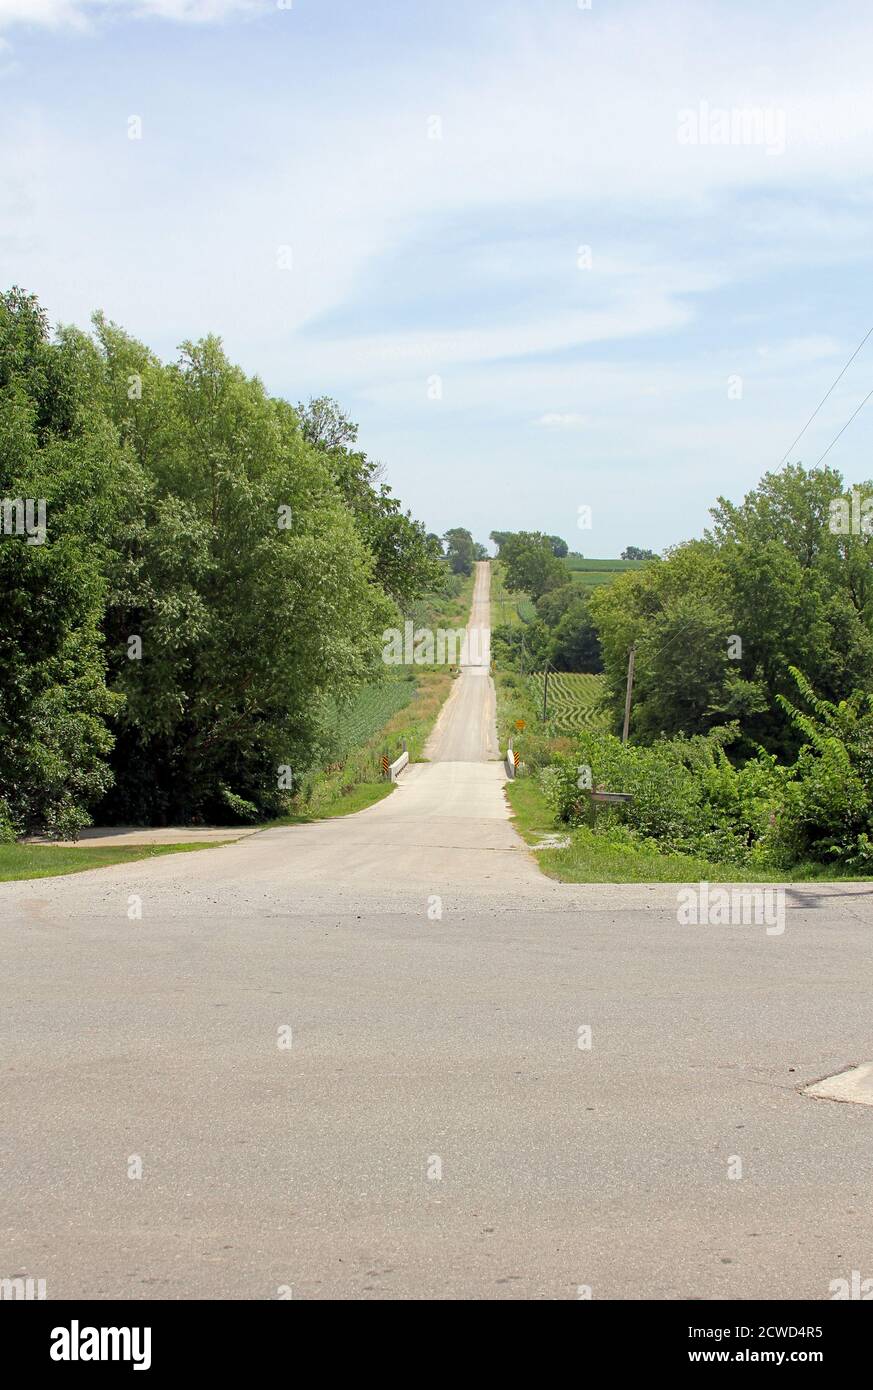 Country road leading through the fields and trees, over a bridge and up a hill into the distance. Stock Photo